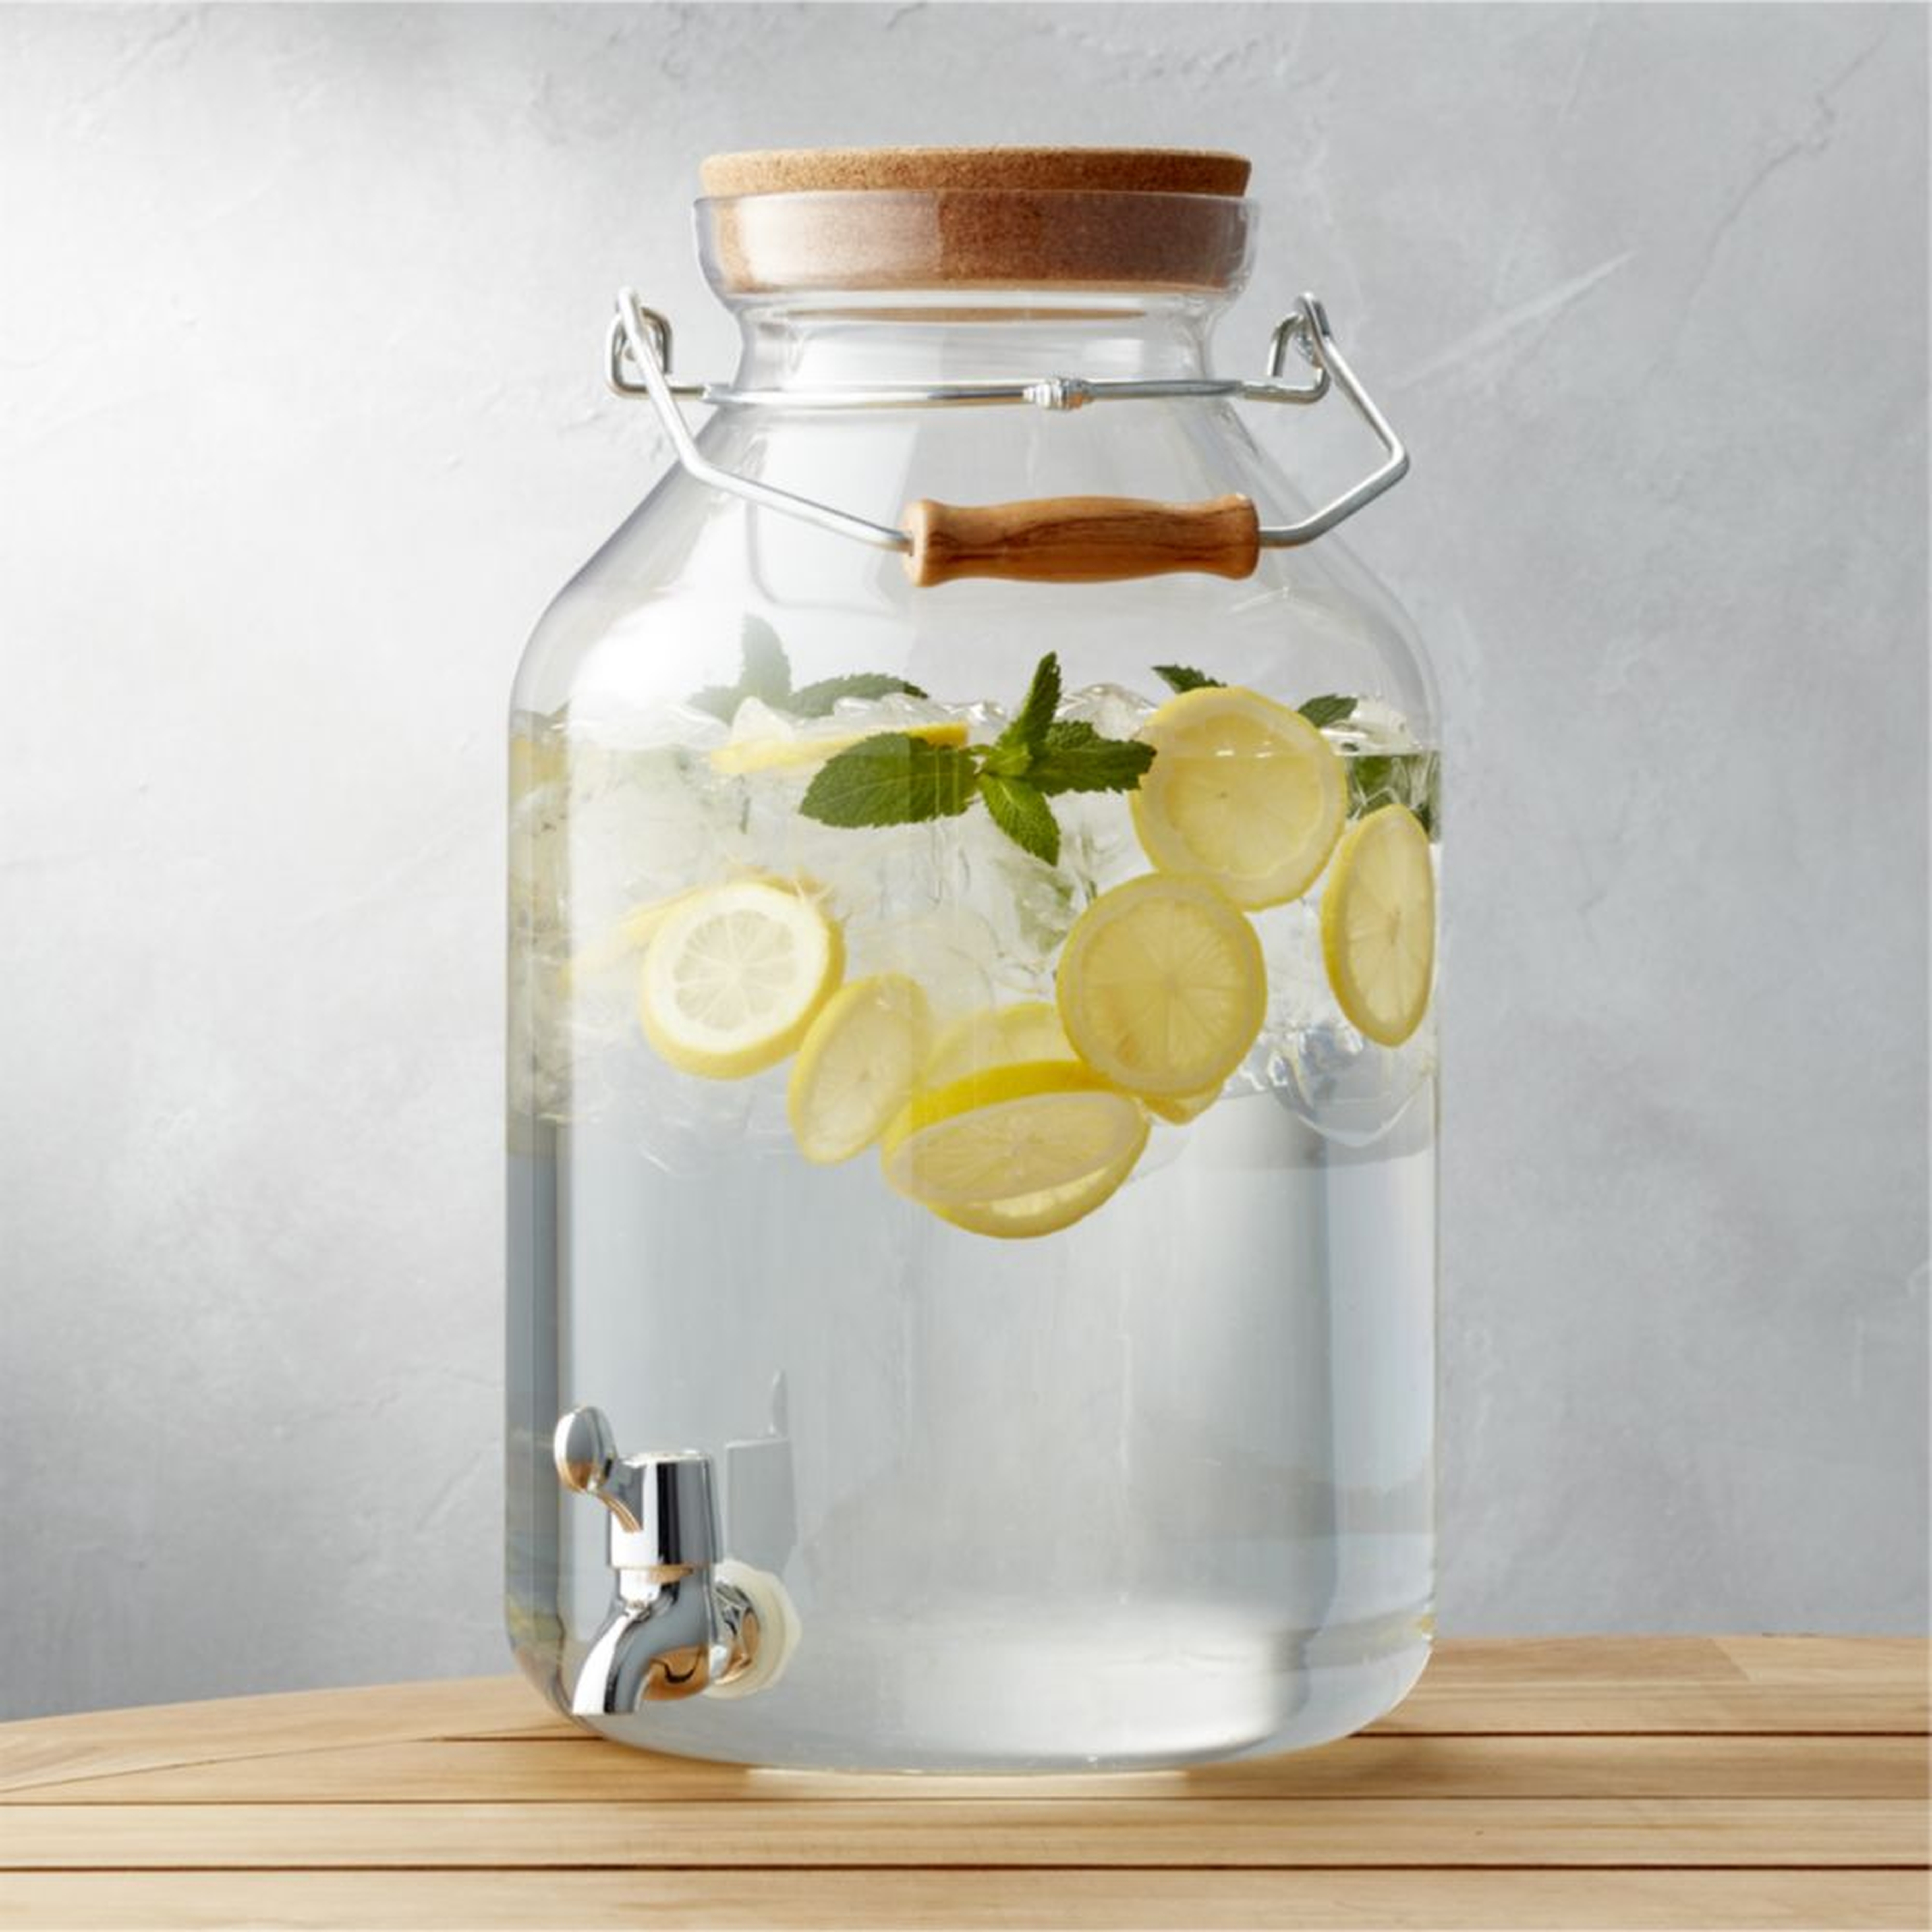 Acrylic Drink Dispenser - Crate and Barrel